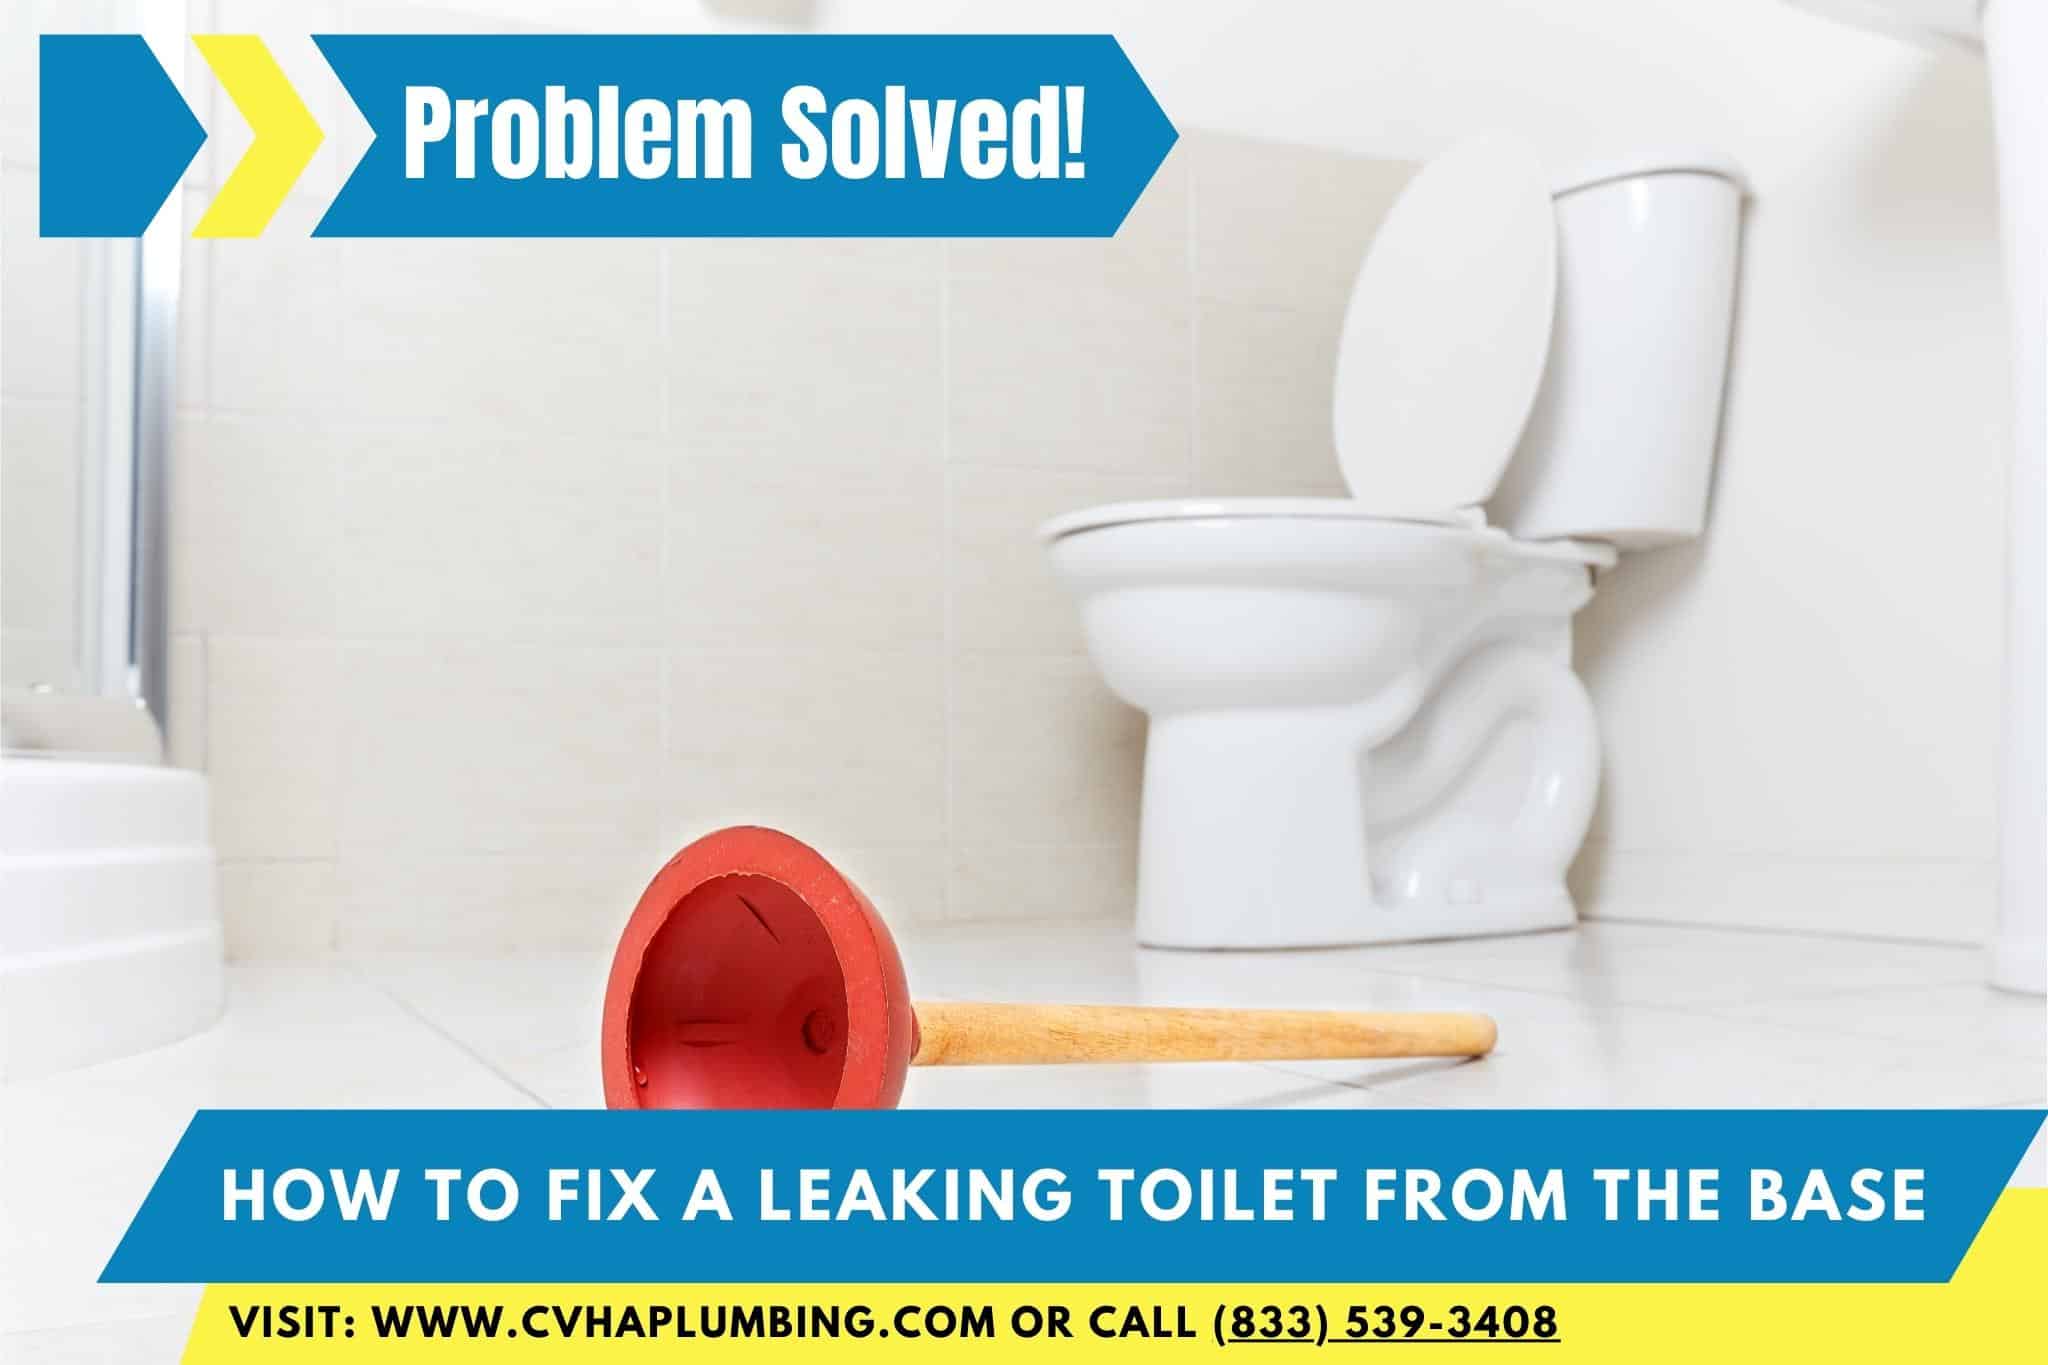 How to Fix a Leaking Toilet from the Base